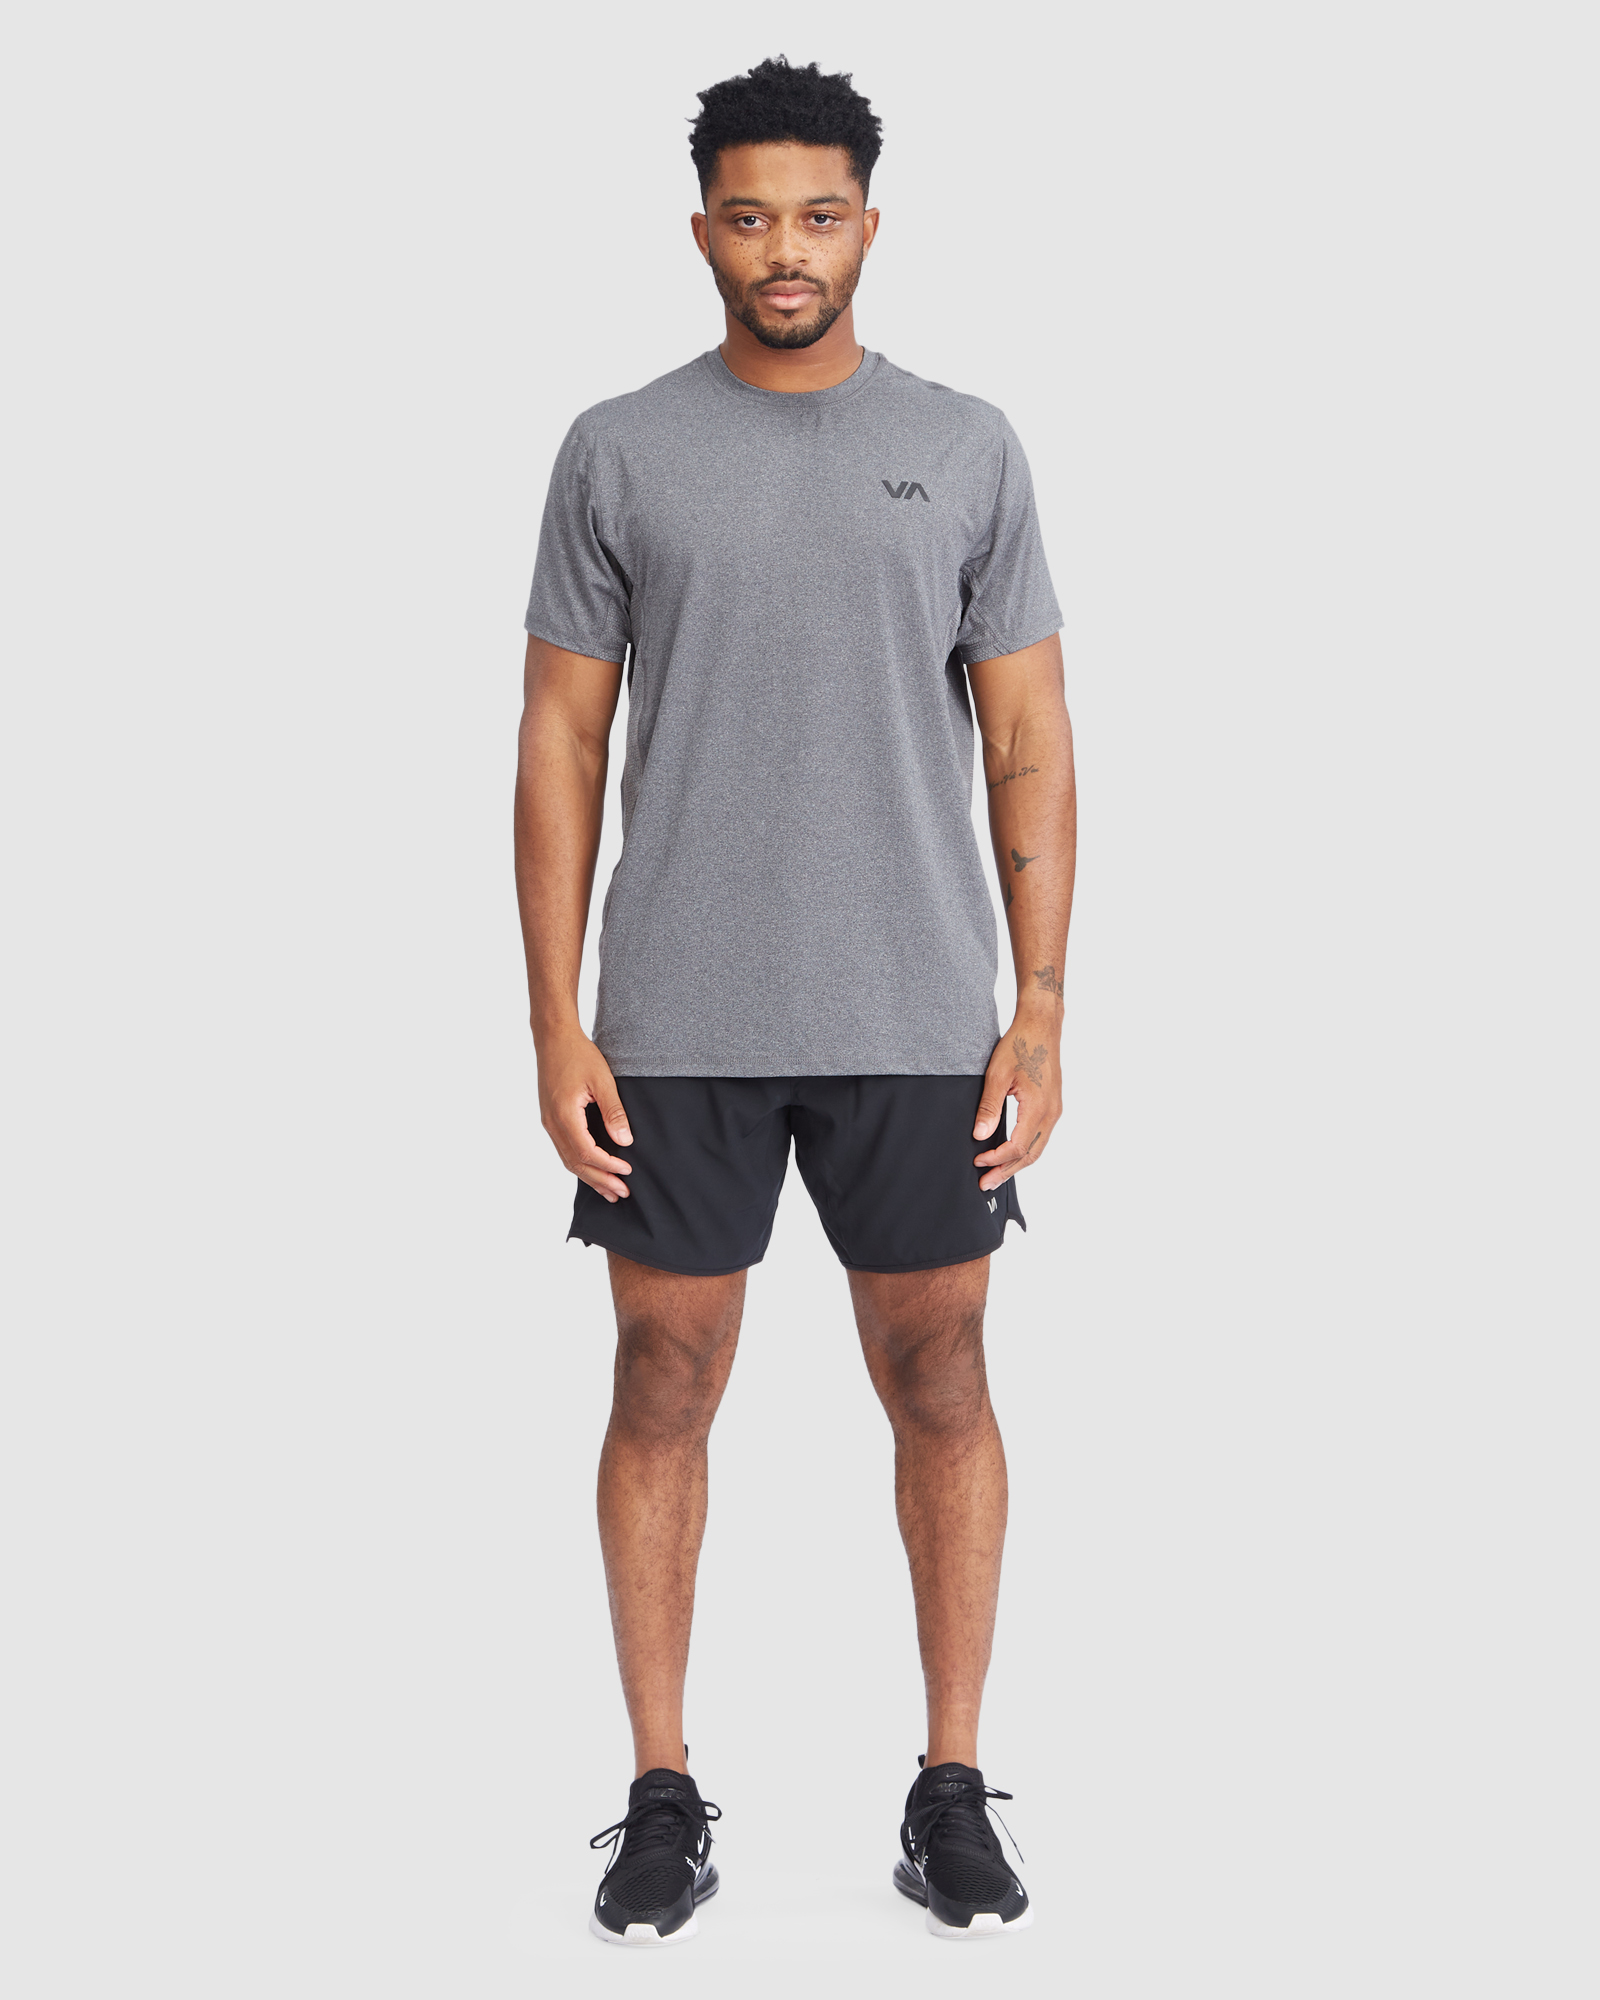 Rvca Sport Vent Ss Performance Tee - Charcoal Heather | SurfStitch